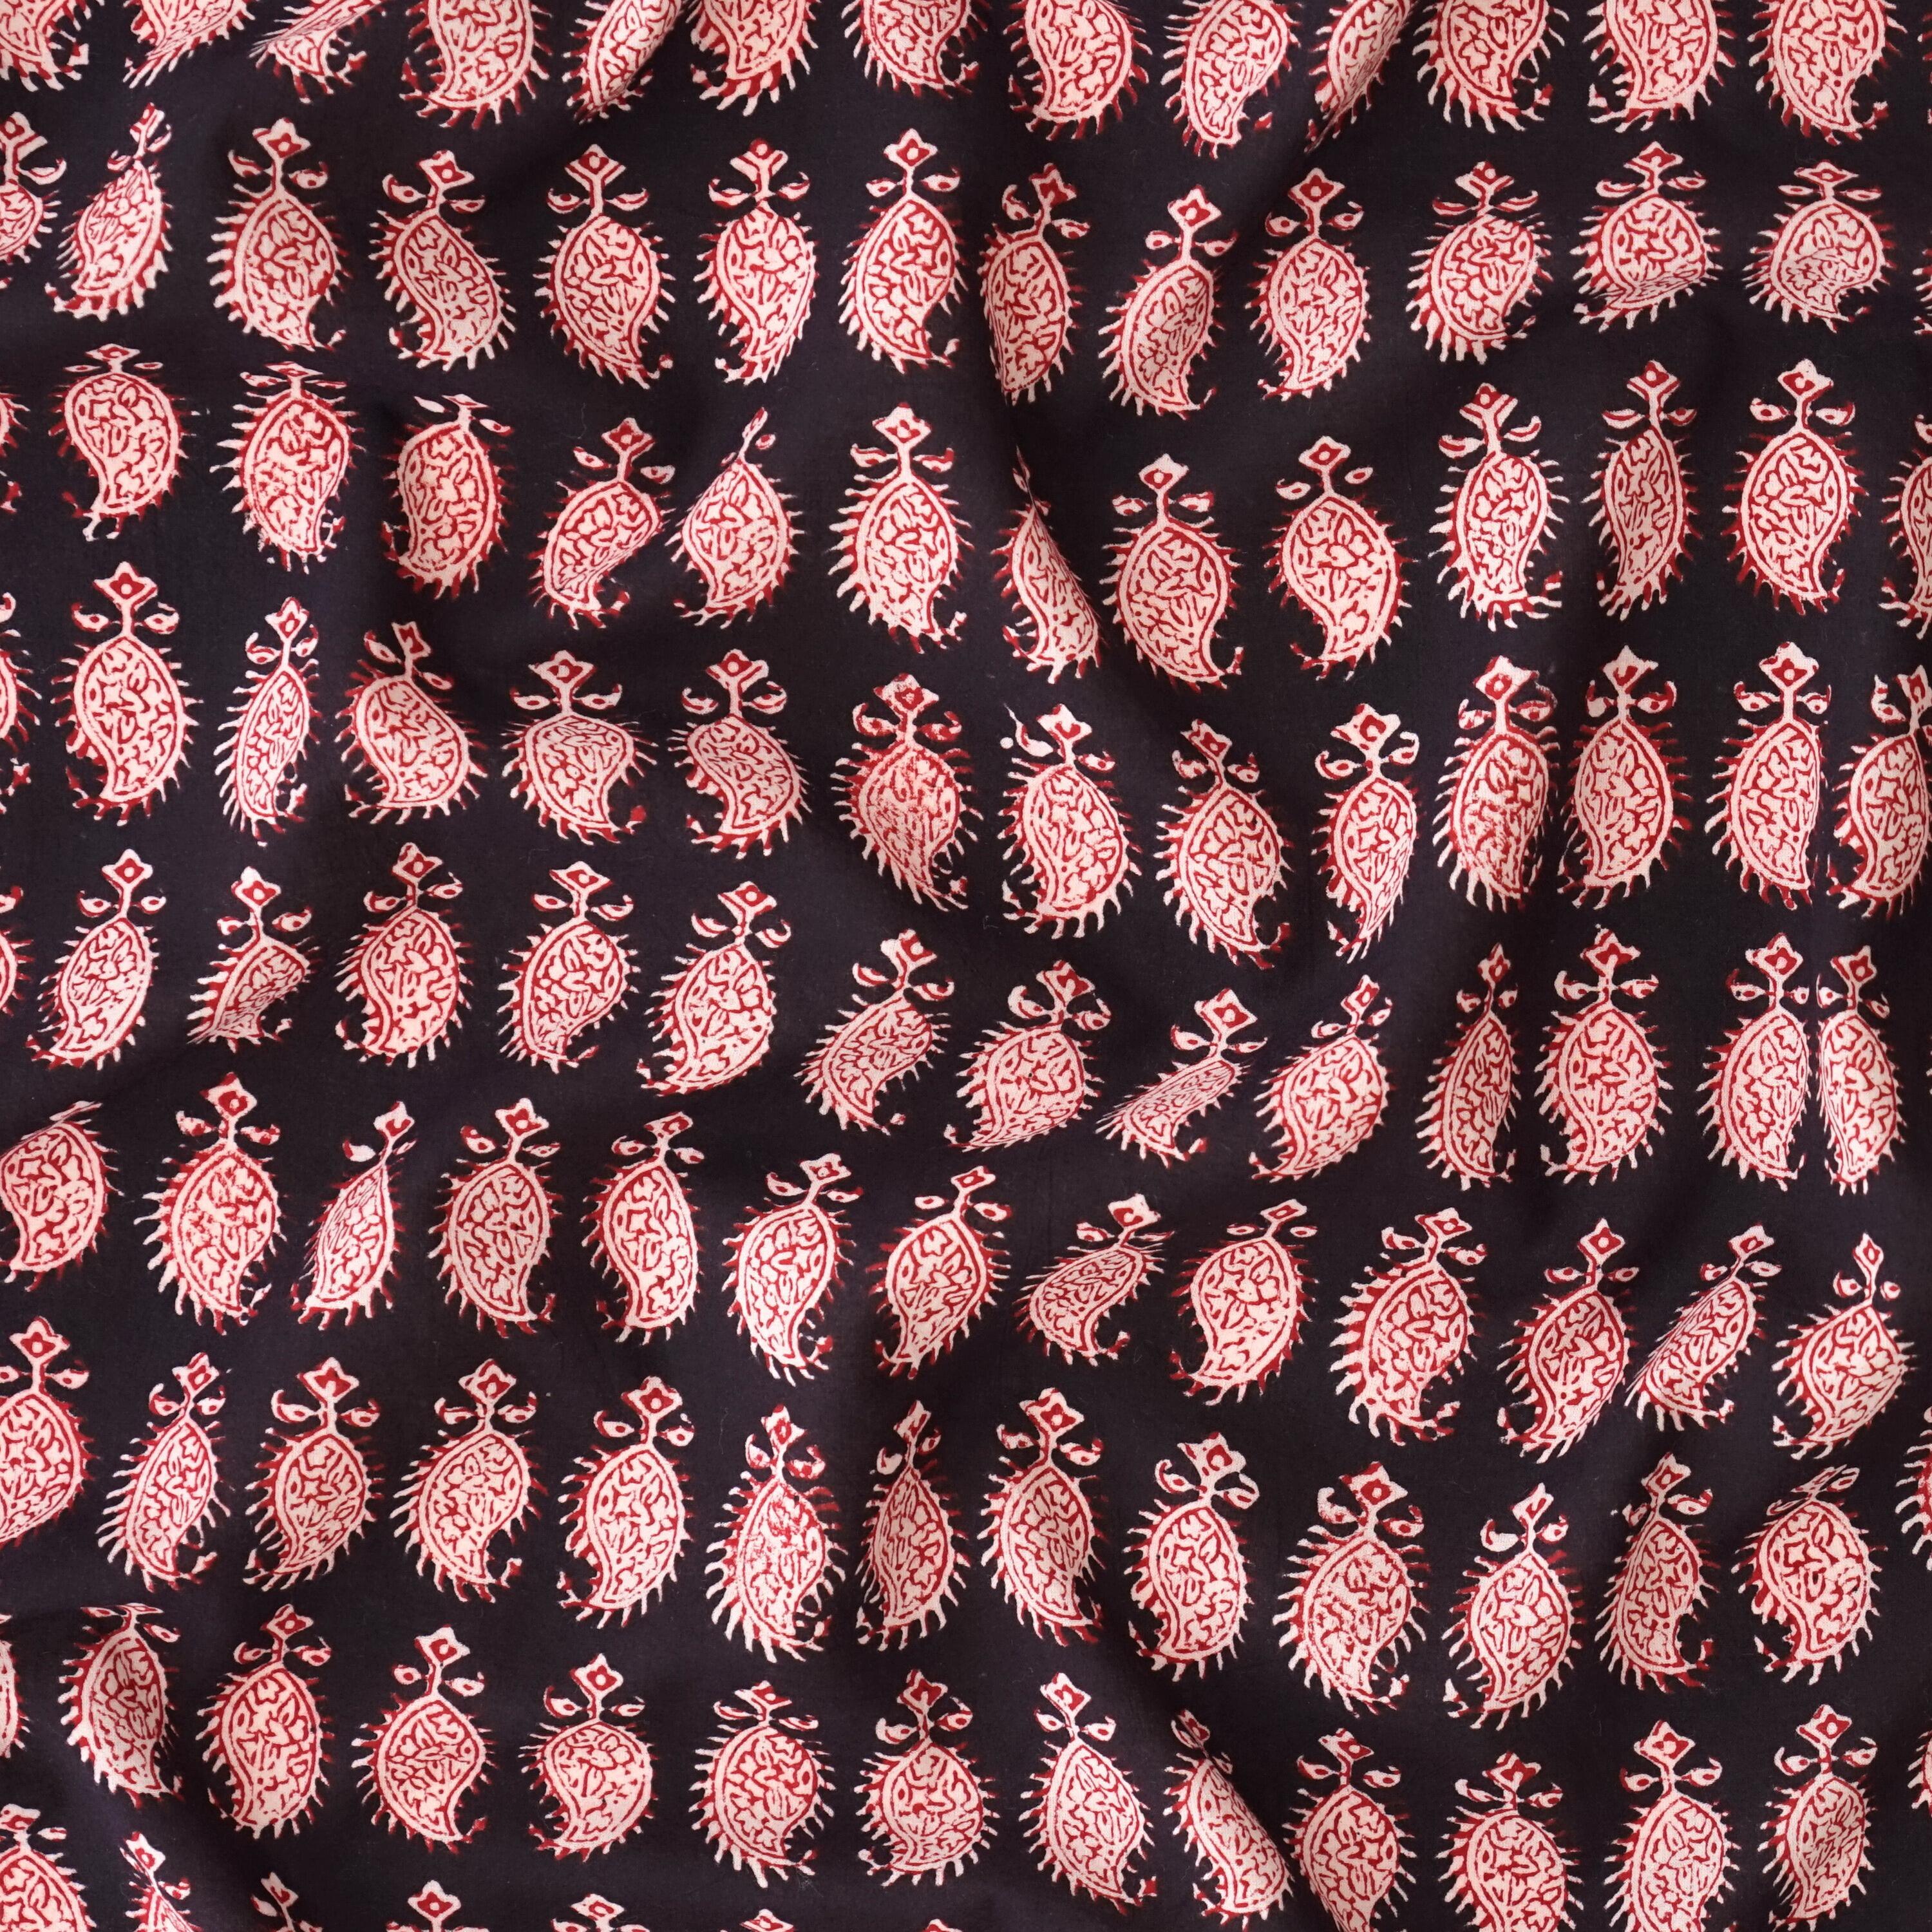 100% Block -Printed Cotton Fabric From India - Cactus Design - Iron Rust Black & Alizarin Red Dyes - Contrast